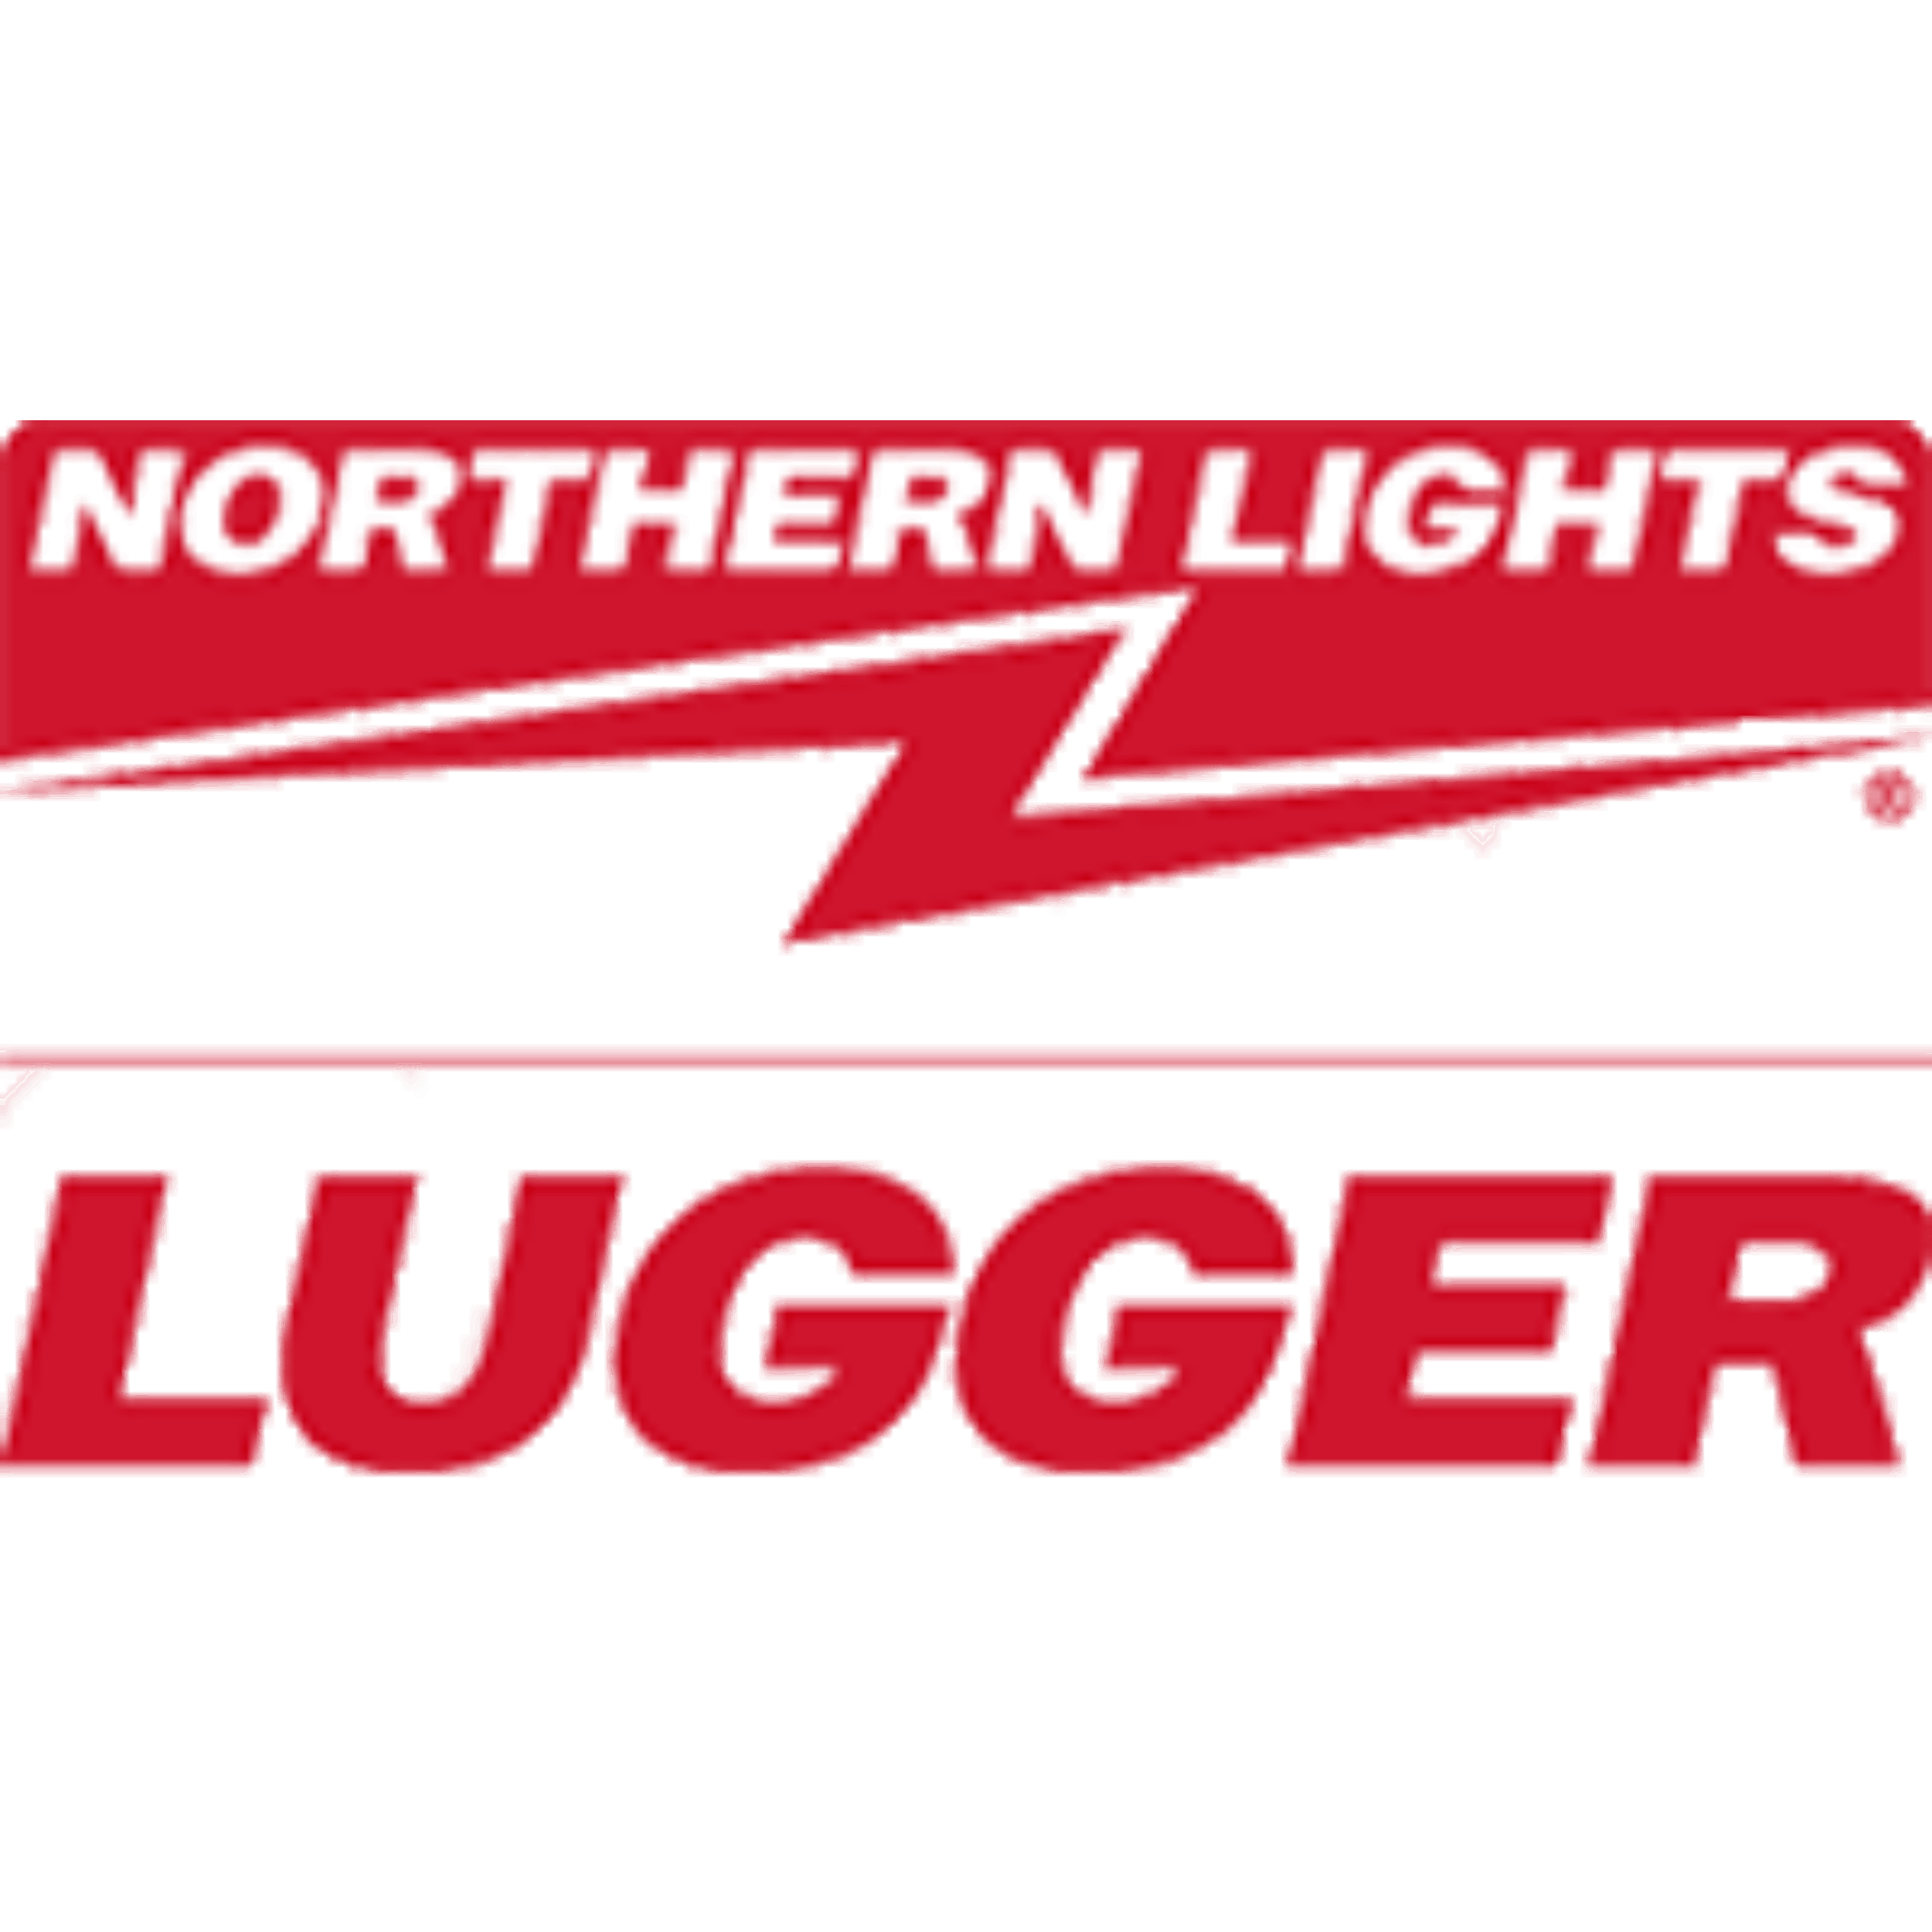 Lugger by Northern Lights logo